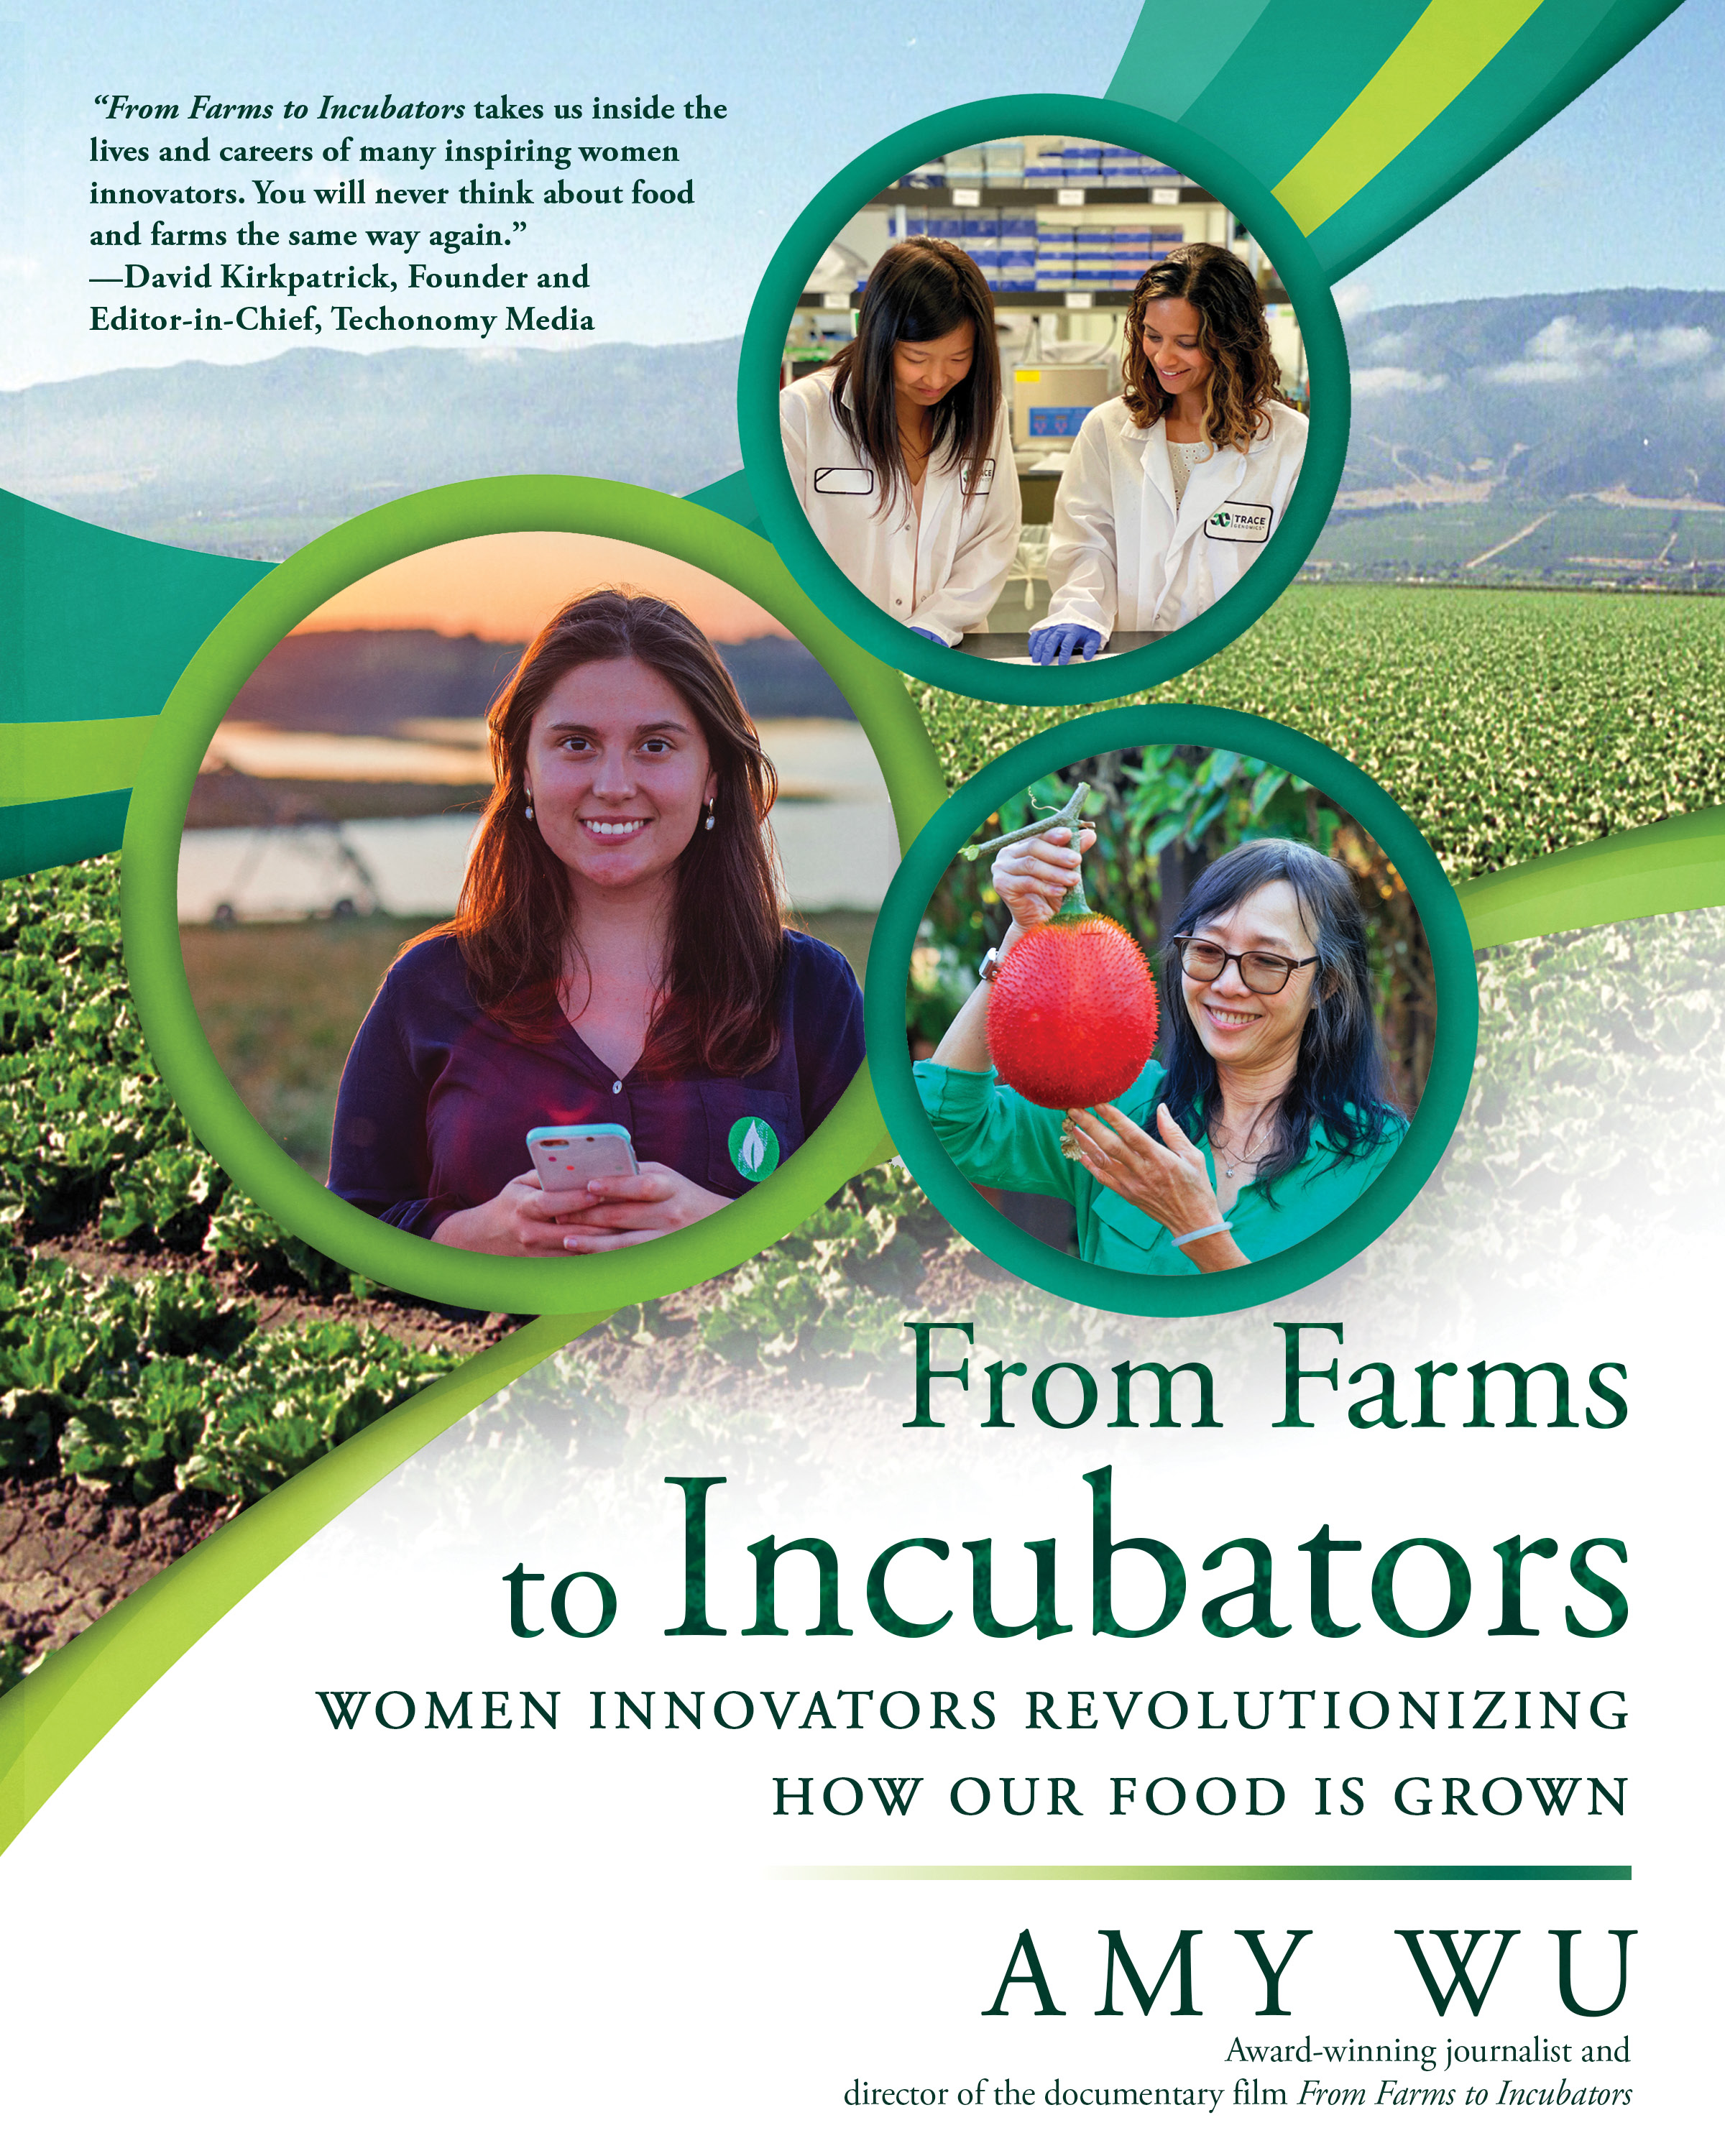 Inspiring Business Book "From Farms to Incubators" Puts a Spotlight on Women Leaders of the Agricultural Technology Revolution